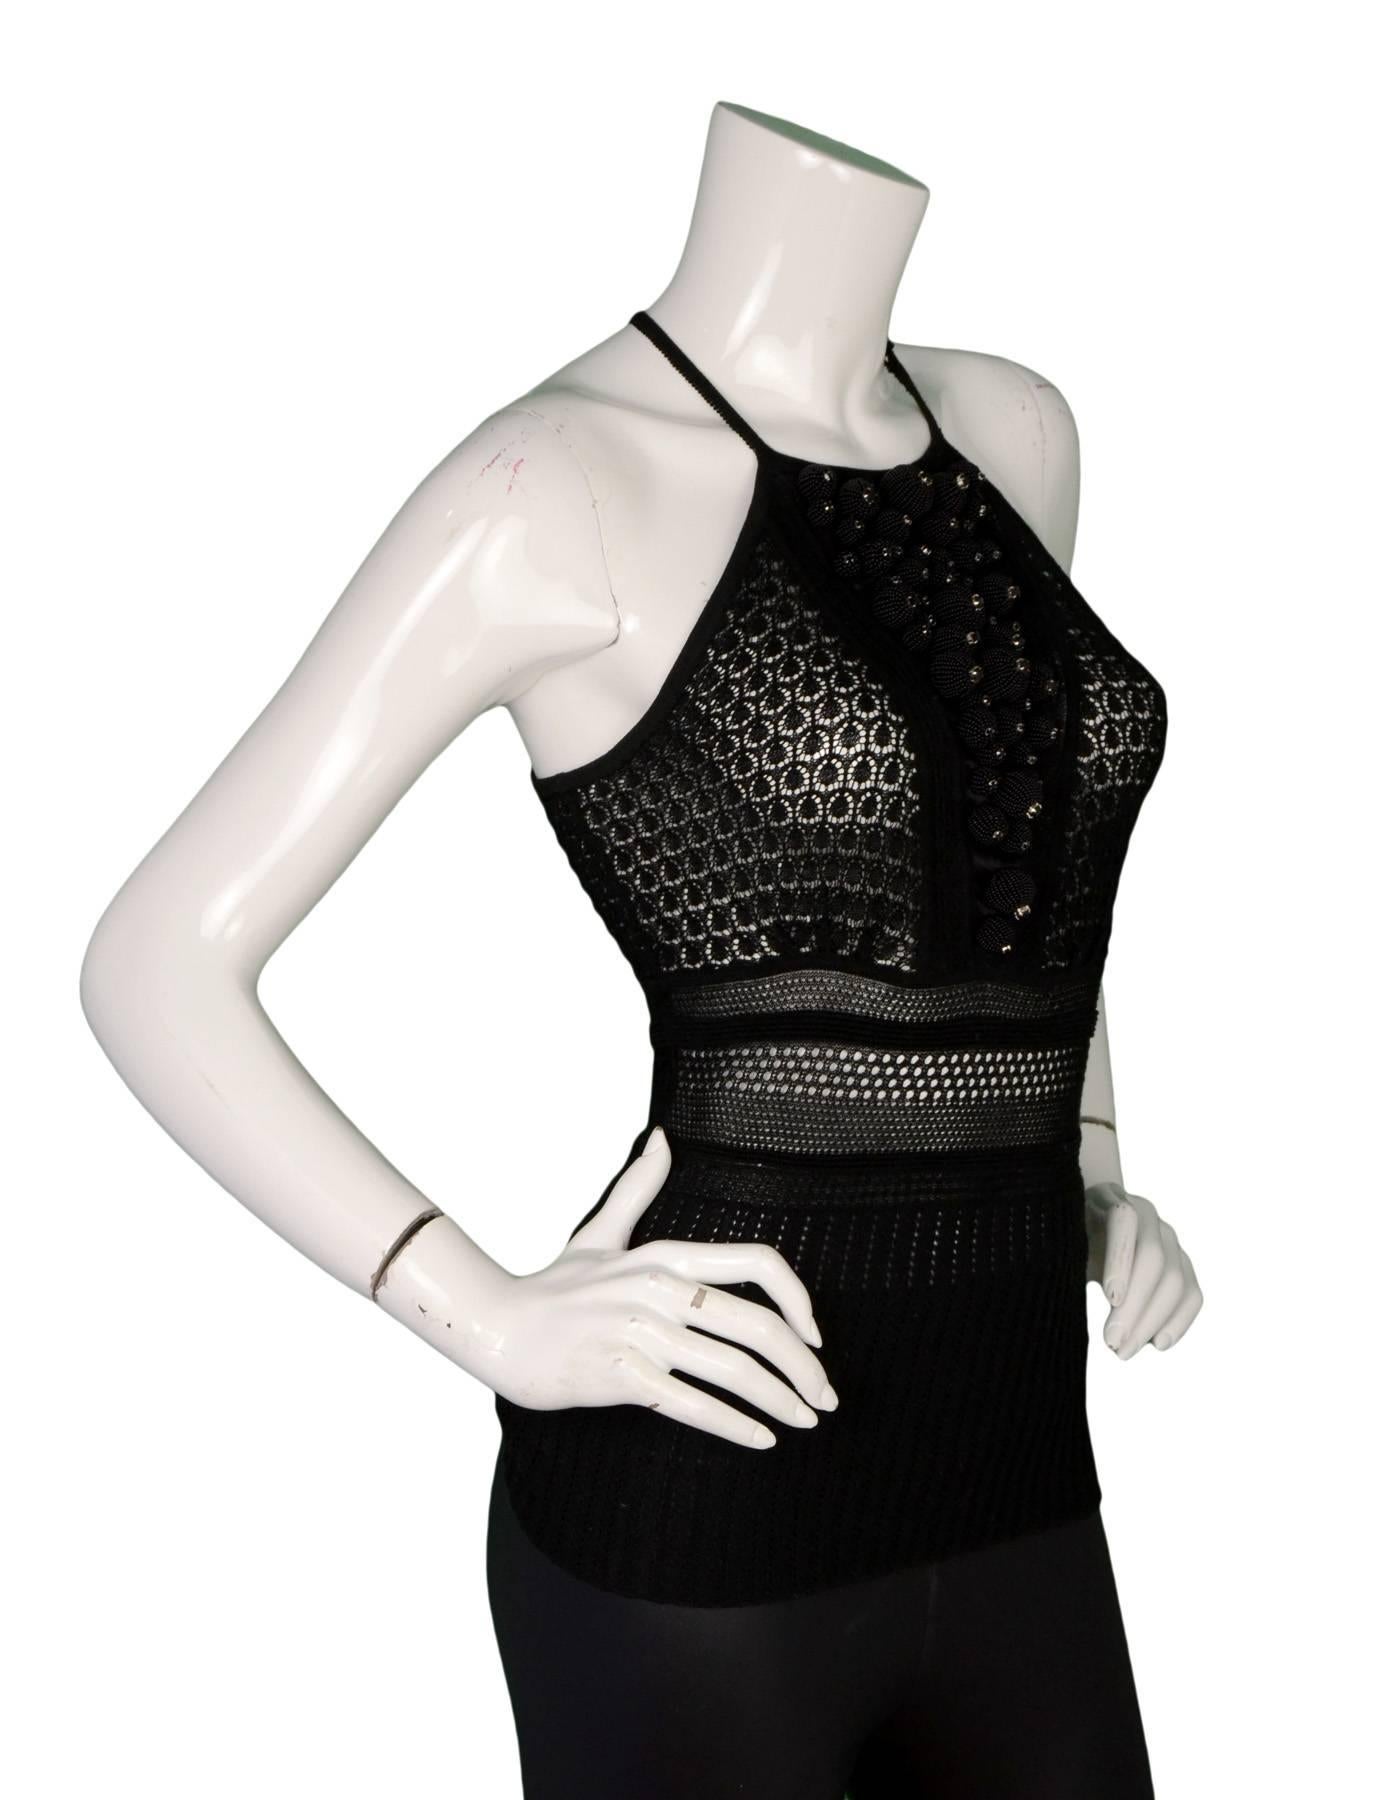 Catherine Malandrino Perforated Top Sz 38

Features cascading beaded ornaments at bust

Made In: Hong Kong
Color: Black
Composition: 82% Cotton, 18% Nylon
Lining: None
Closure/Opening: Pull-over with single button at neckline
Overall